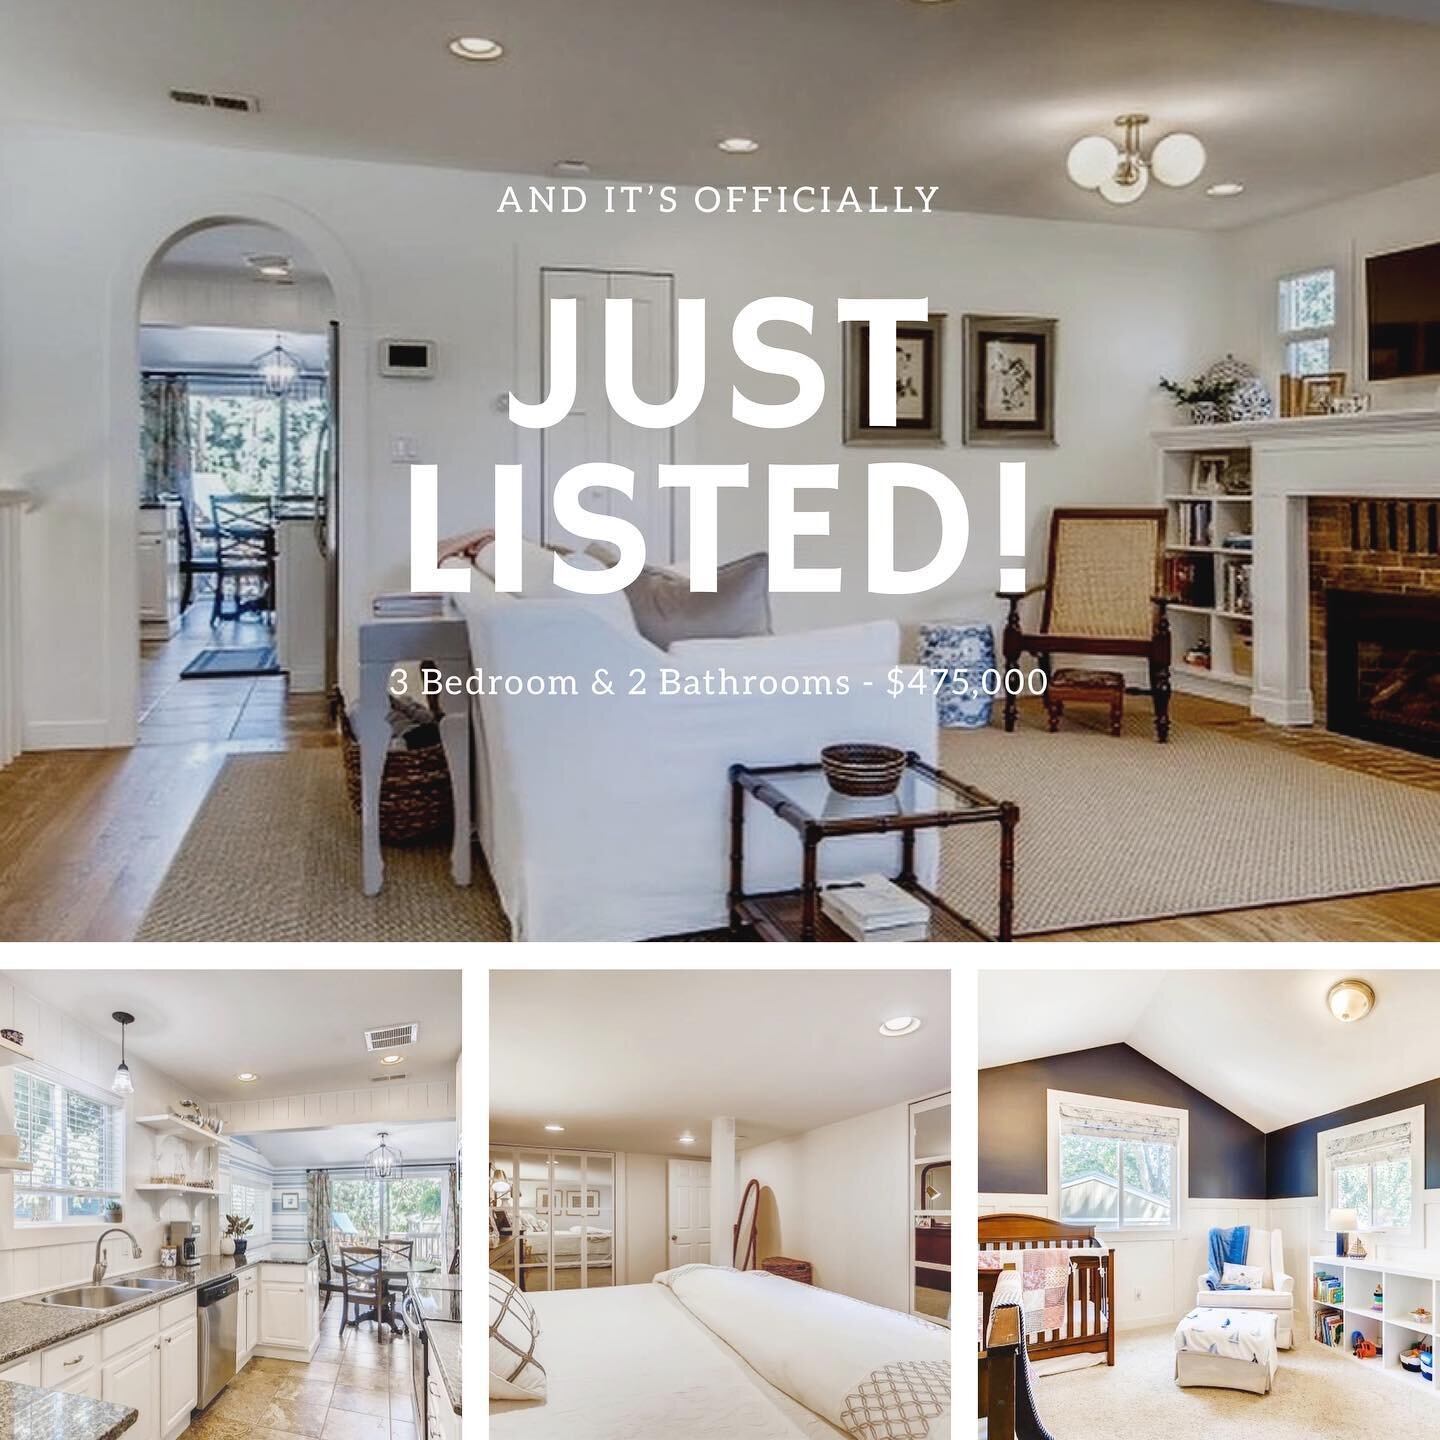 This stunner was just listed by Emily Heck and we know it&rsquo;s not going to last long! Reach out to emily@emblemre.com or message her at @selling.the.rockies for the inside scooo!